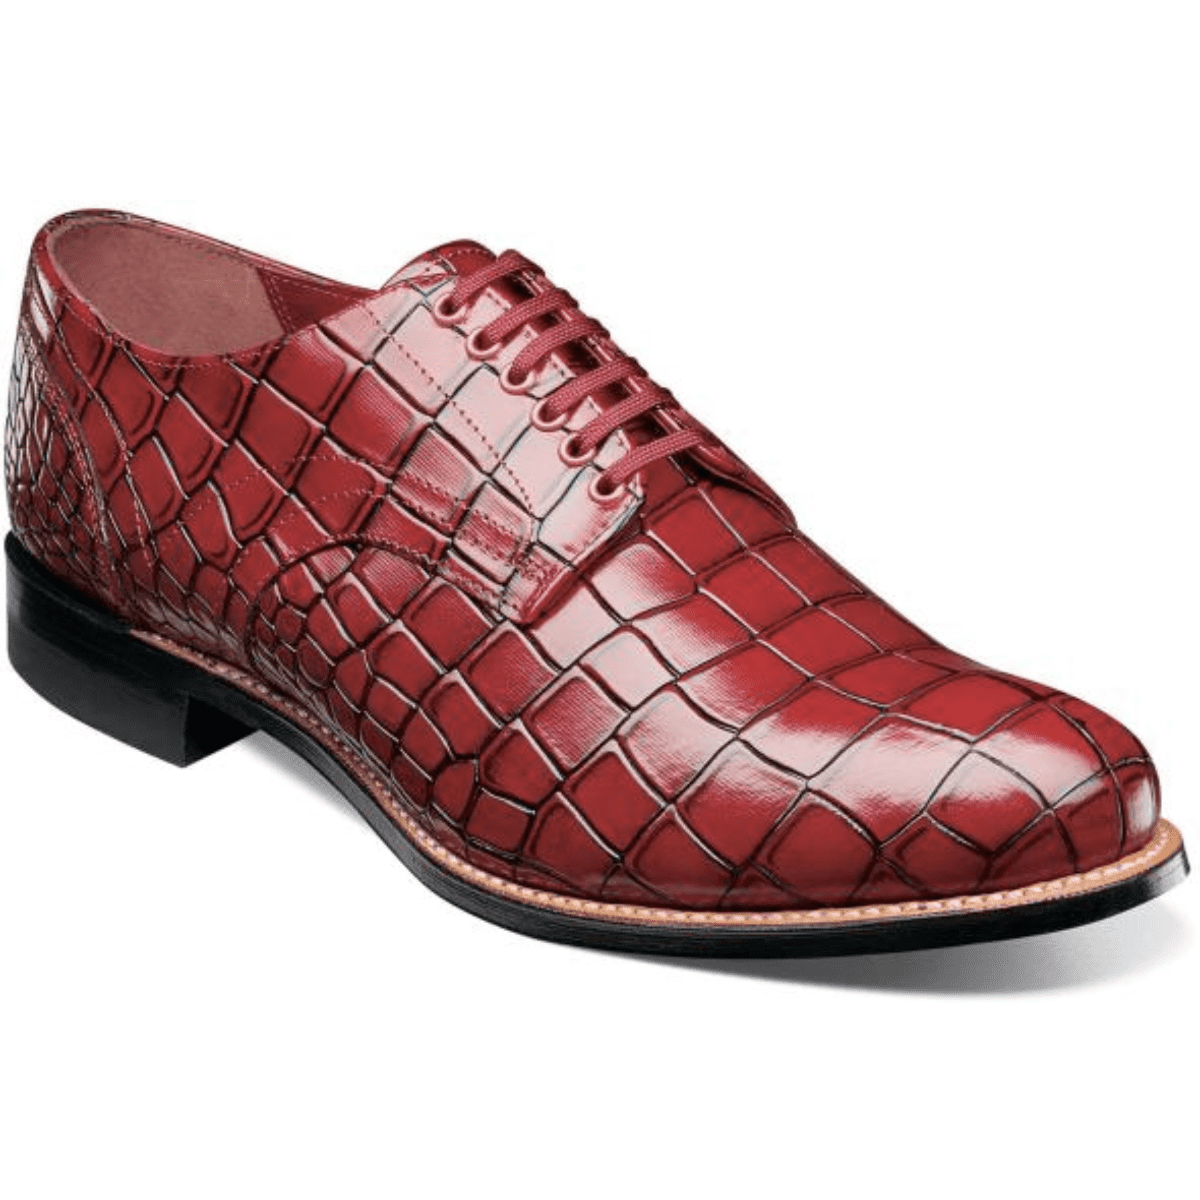 Stacy Adams - Stacy Adams Madison Oxford Shoes Crocodile Print Leather ...